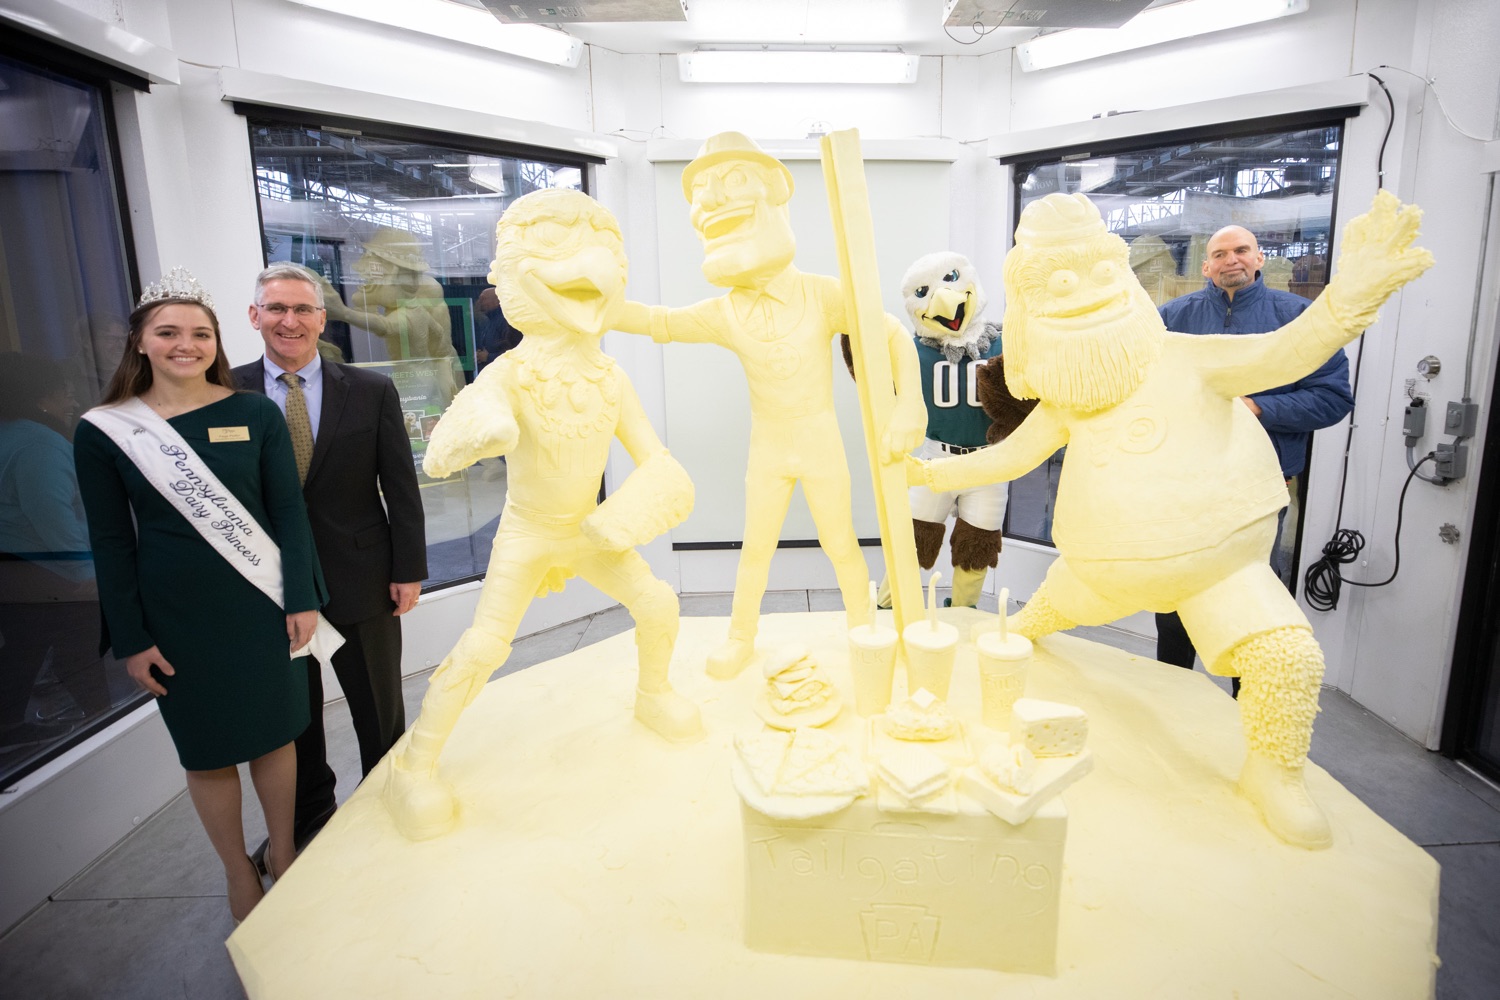 Lt. Governor John Fetterman and Secretary of Agriculture Russell Redding today unveiled the 2020 Pennsylvania Farm Show butter sculpture, carved from a half-ton of butter depicting three of Pennsylvanias beloved professional sports mascots: Philadelphia Flyers Gritty, Philadelphia Eagles Swoop, and Pittsburgh Steelers Steely McBeam celebrating with a spread of Pennsylvania dairy products. The sculpture, a long-time Farm Show staple, encourages Pennsylvanians to be a fan of Pennsylvania dairy and give a cheer to the more than 6,200 dairy farmers in the commonwealth.  Harrisburg, PA  January 2, 2020<br><a href="https://filesource.amperwave.net/commonwealthofpa/photo/17646_agric_butter_sculpture_dz_020.jpg" target="_blank">⇣ Download Photo</a>